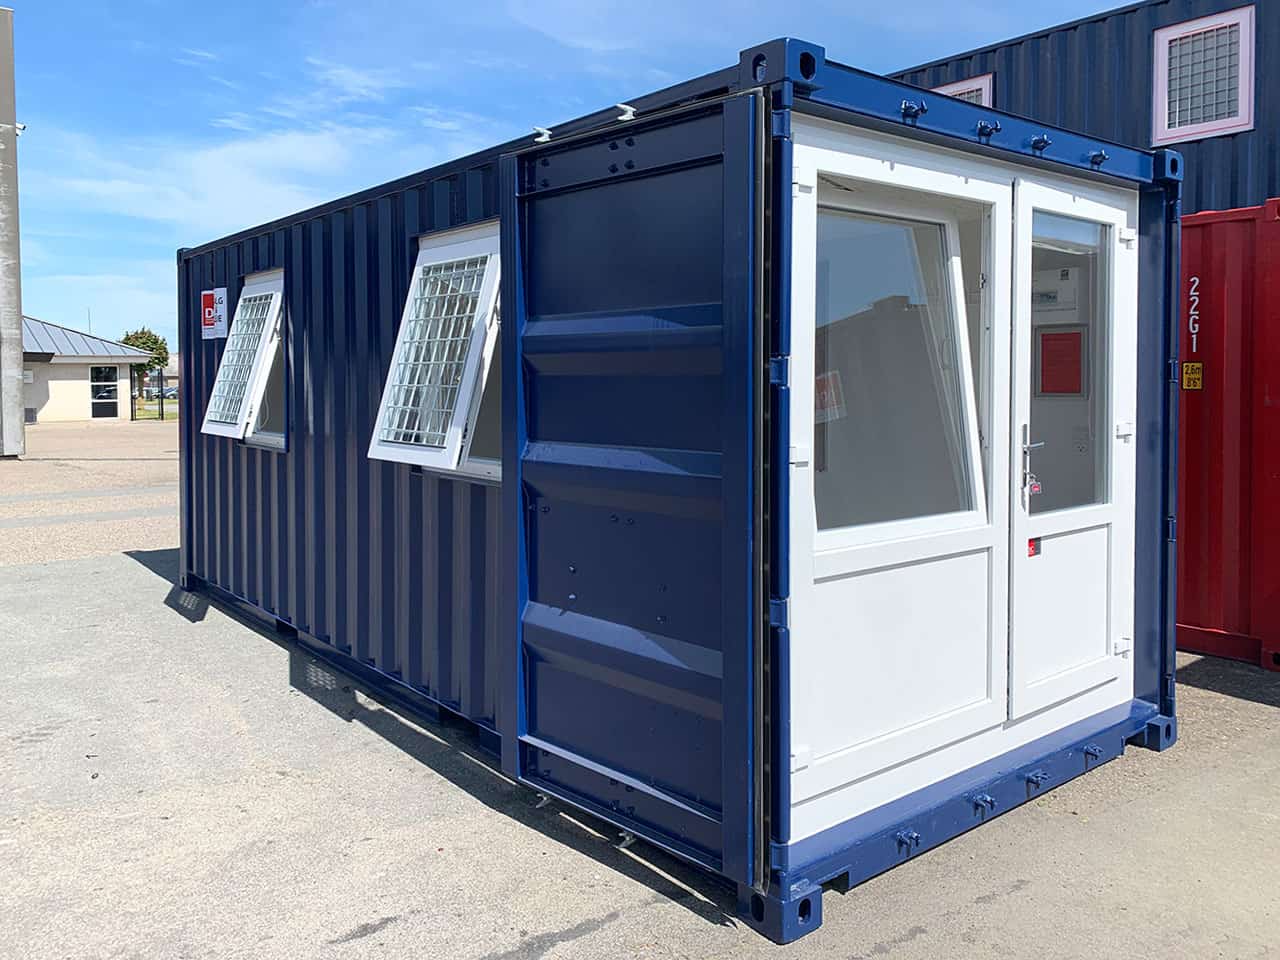 Office Container with Two Windows - DCS 2042